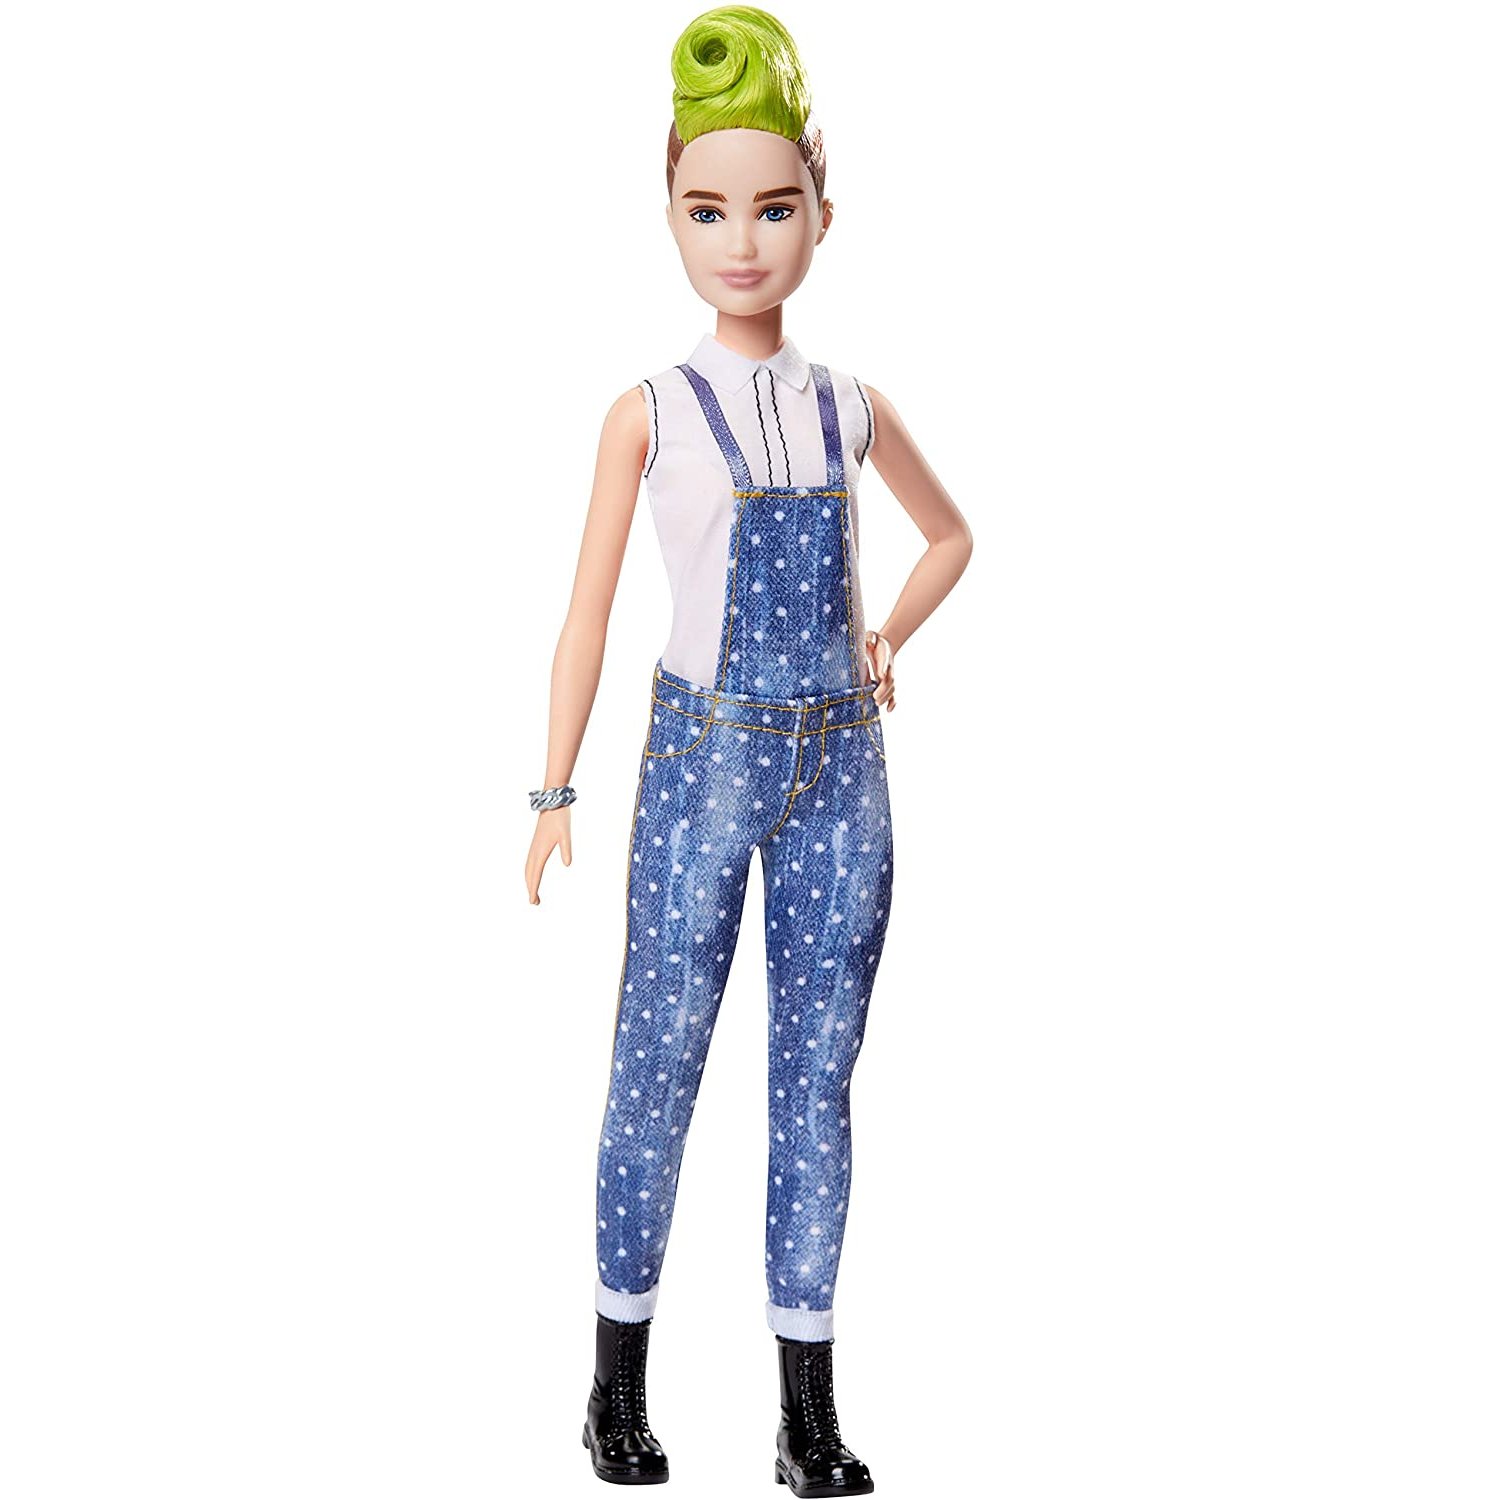 ?Barbie Fashionistas Doll with Green Striped Mohawk Wearing Denim Overalls, Top and Accessories, for 3 to 8 Year Olds